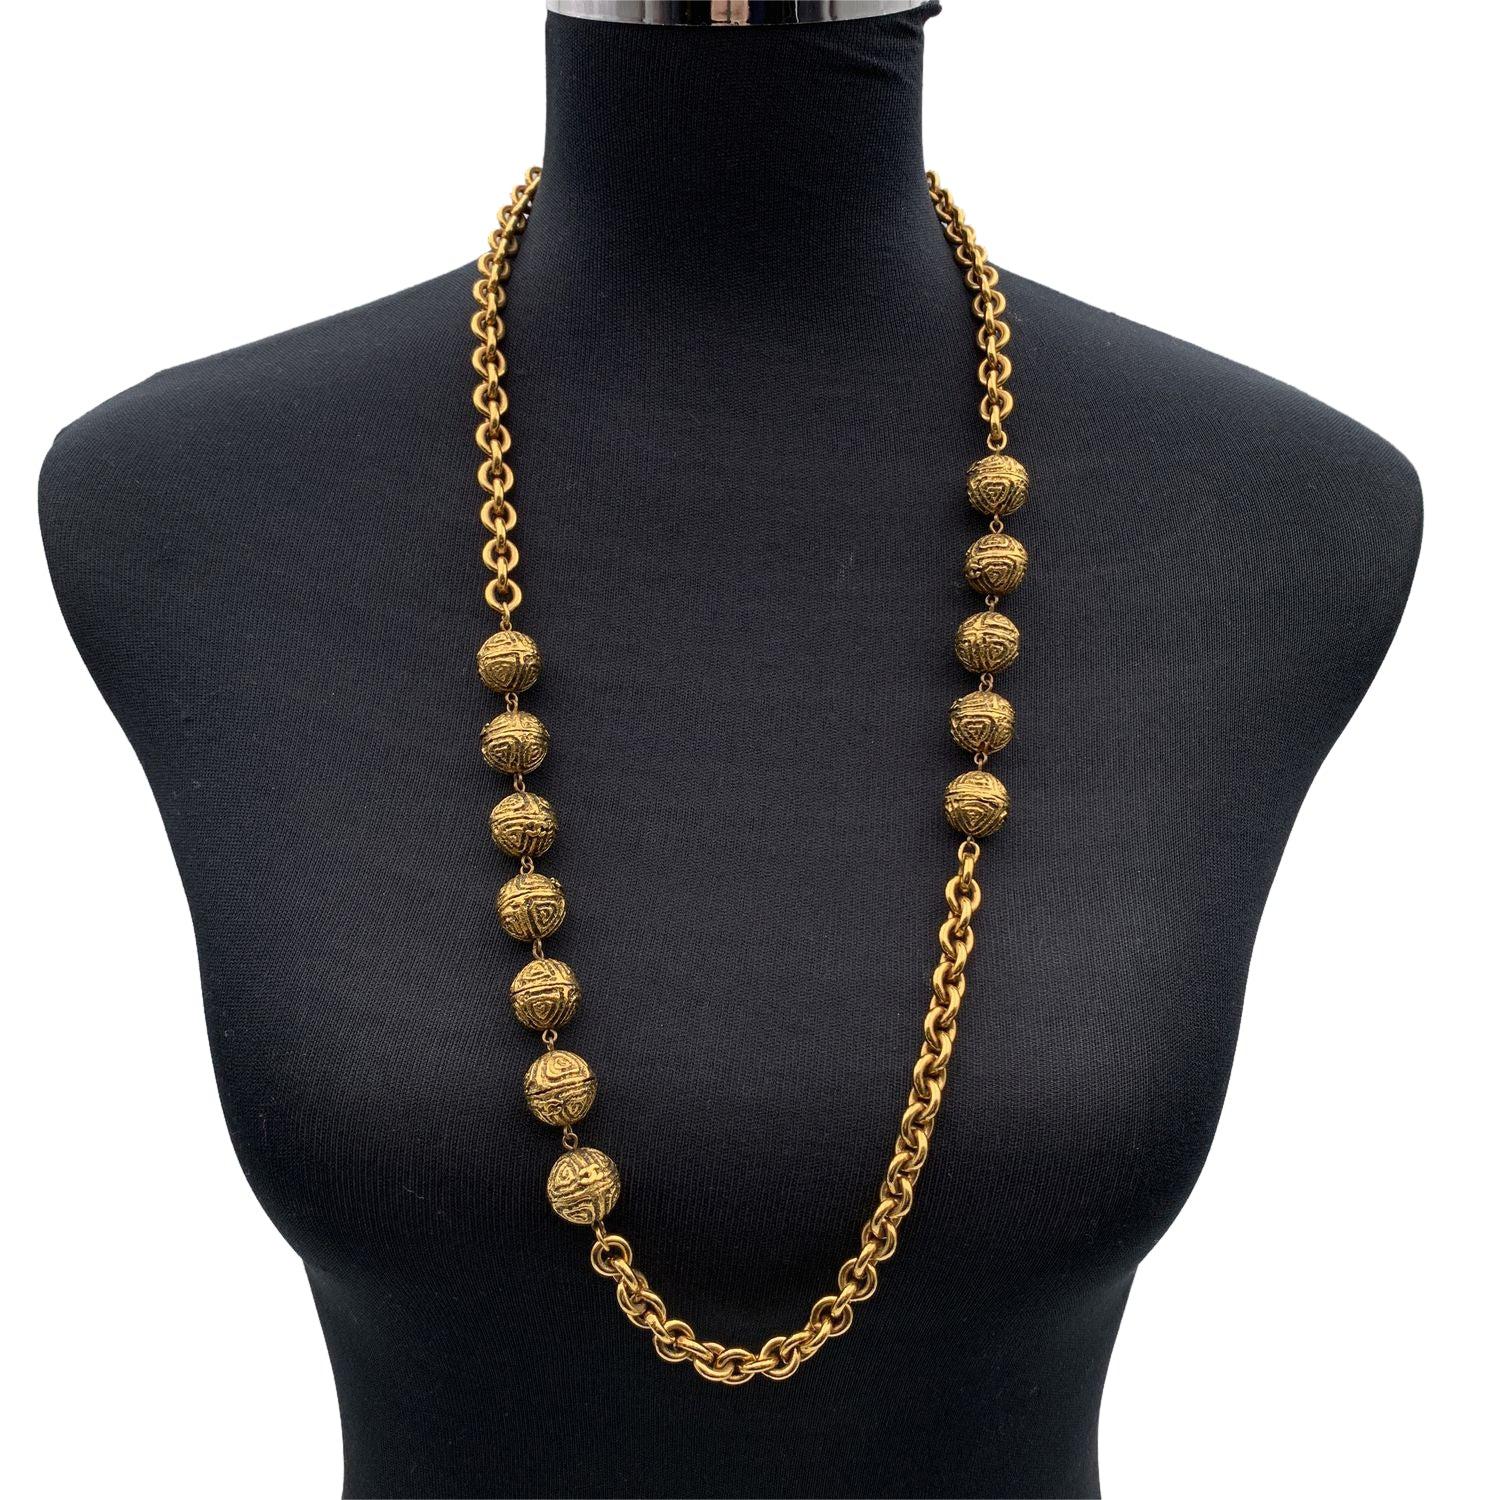 Vintage gold metal chain necklace with metal beads from CHANEL. Boxclosure. Necklace length: 31 inches - 78.7 cm. 'CHANEL - CC - 1985' and 'Made in France' oval tab at the end of the nacklace Condition A - EXCELLENT Gently used. Please, look